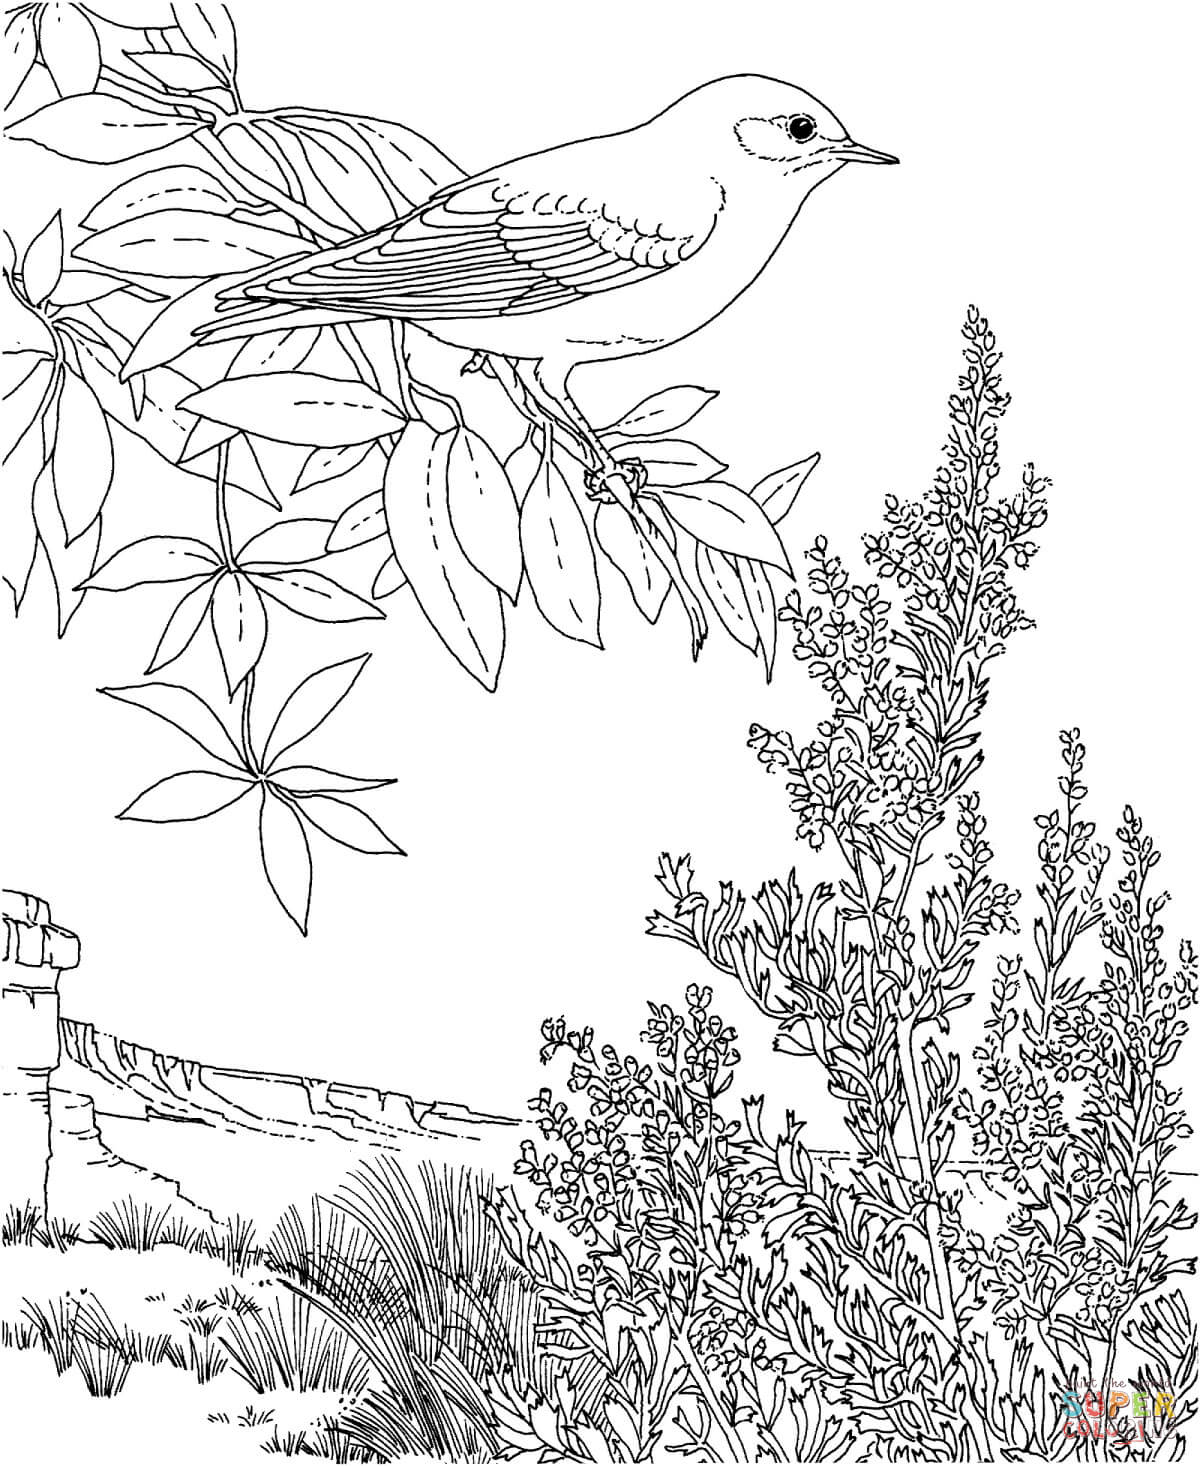 Eastern Bluebird coloring, Download Eastern Bluebird coloring for free 2019